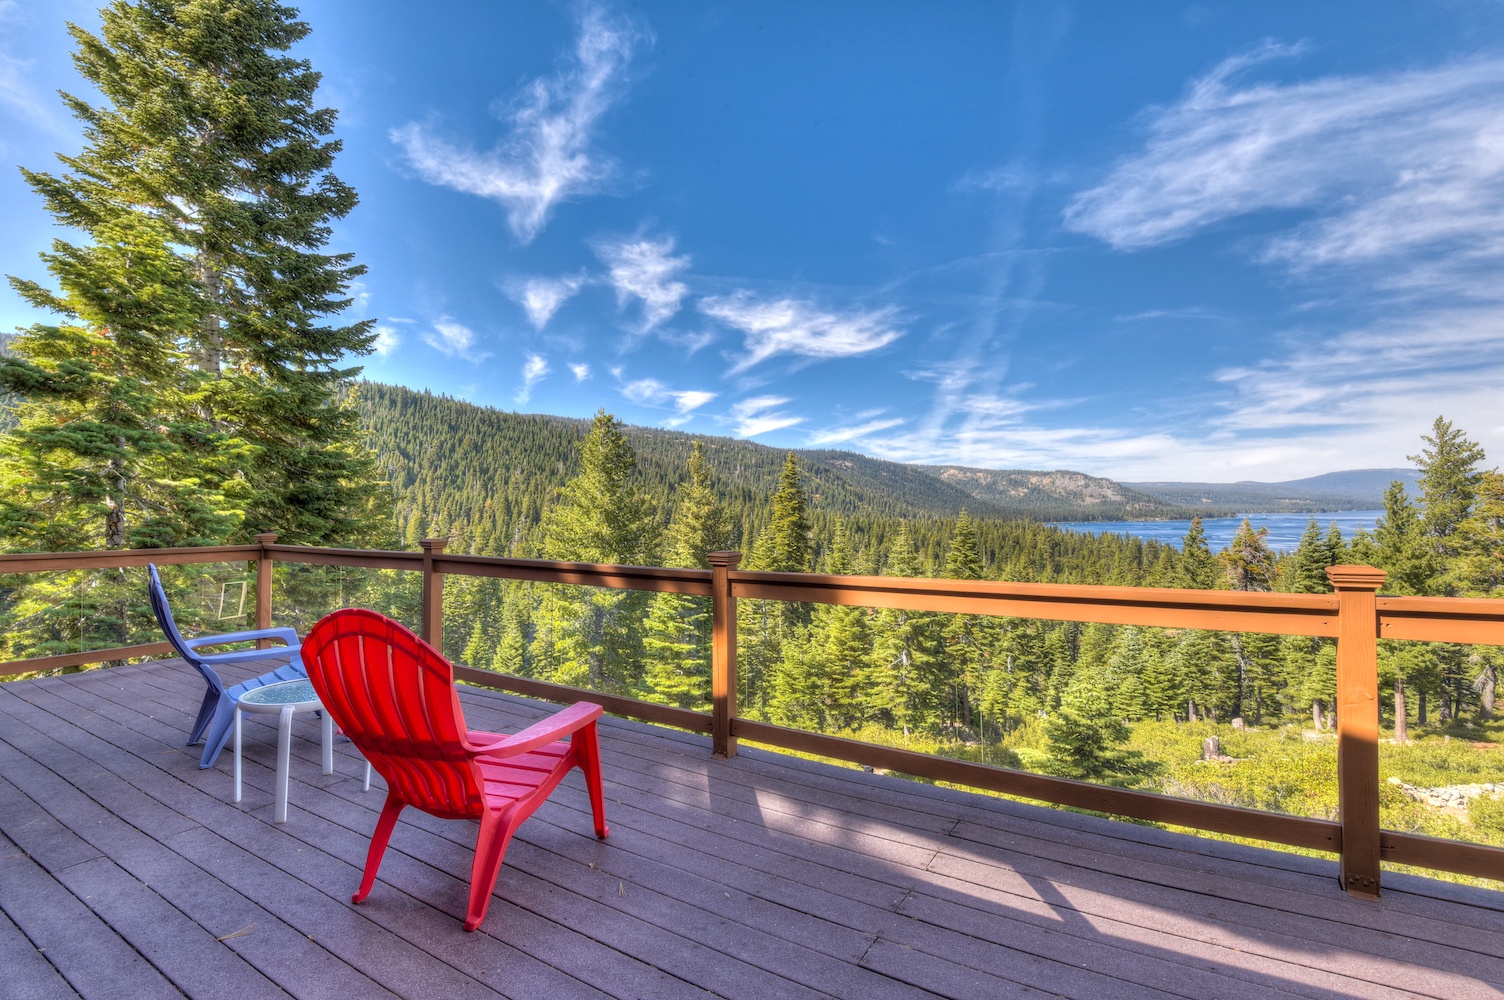 Relax on the private balcony with a lake view